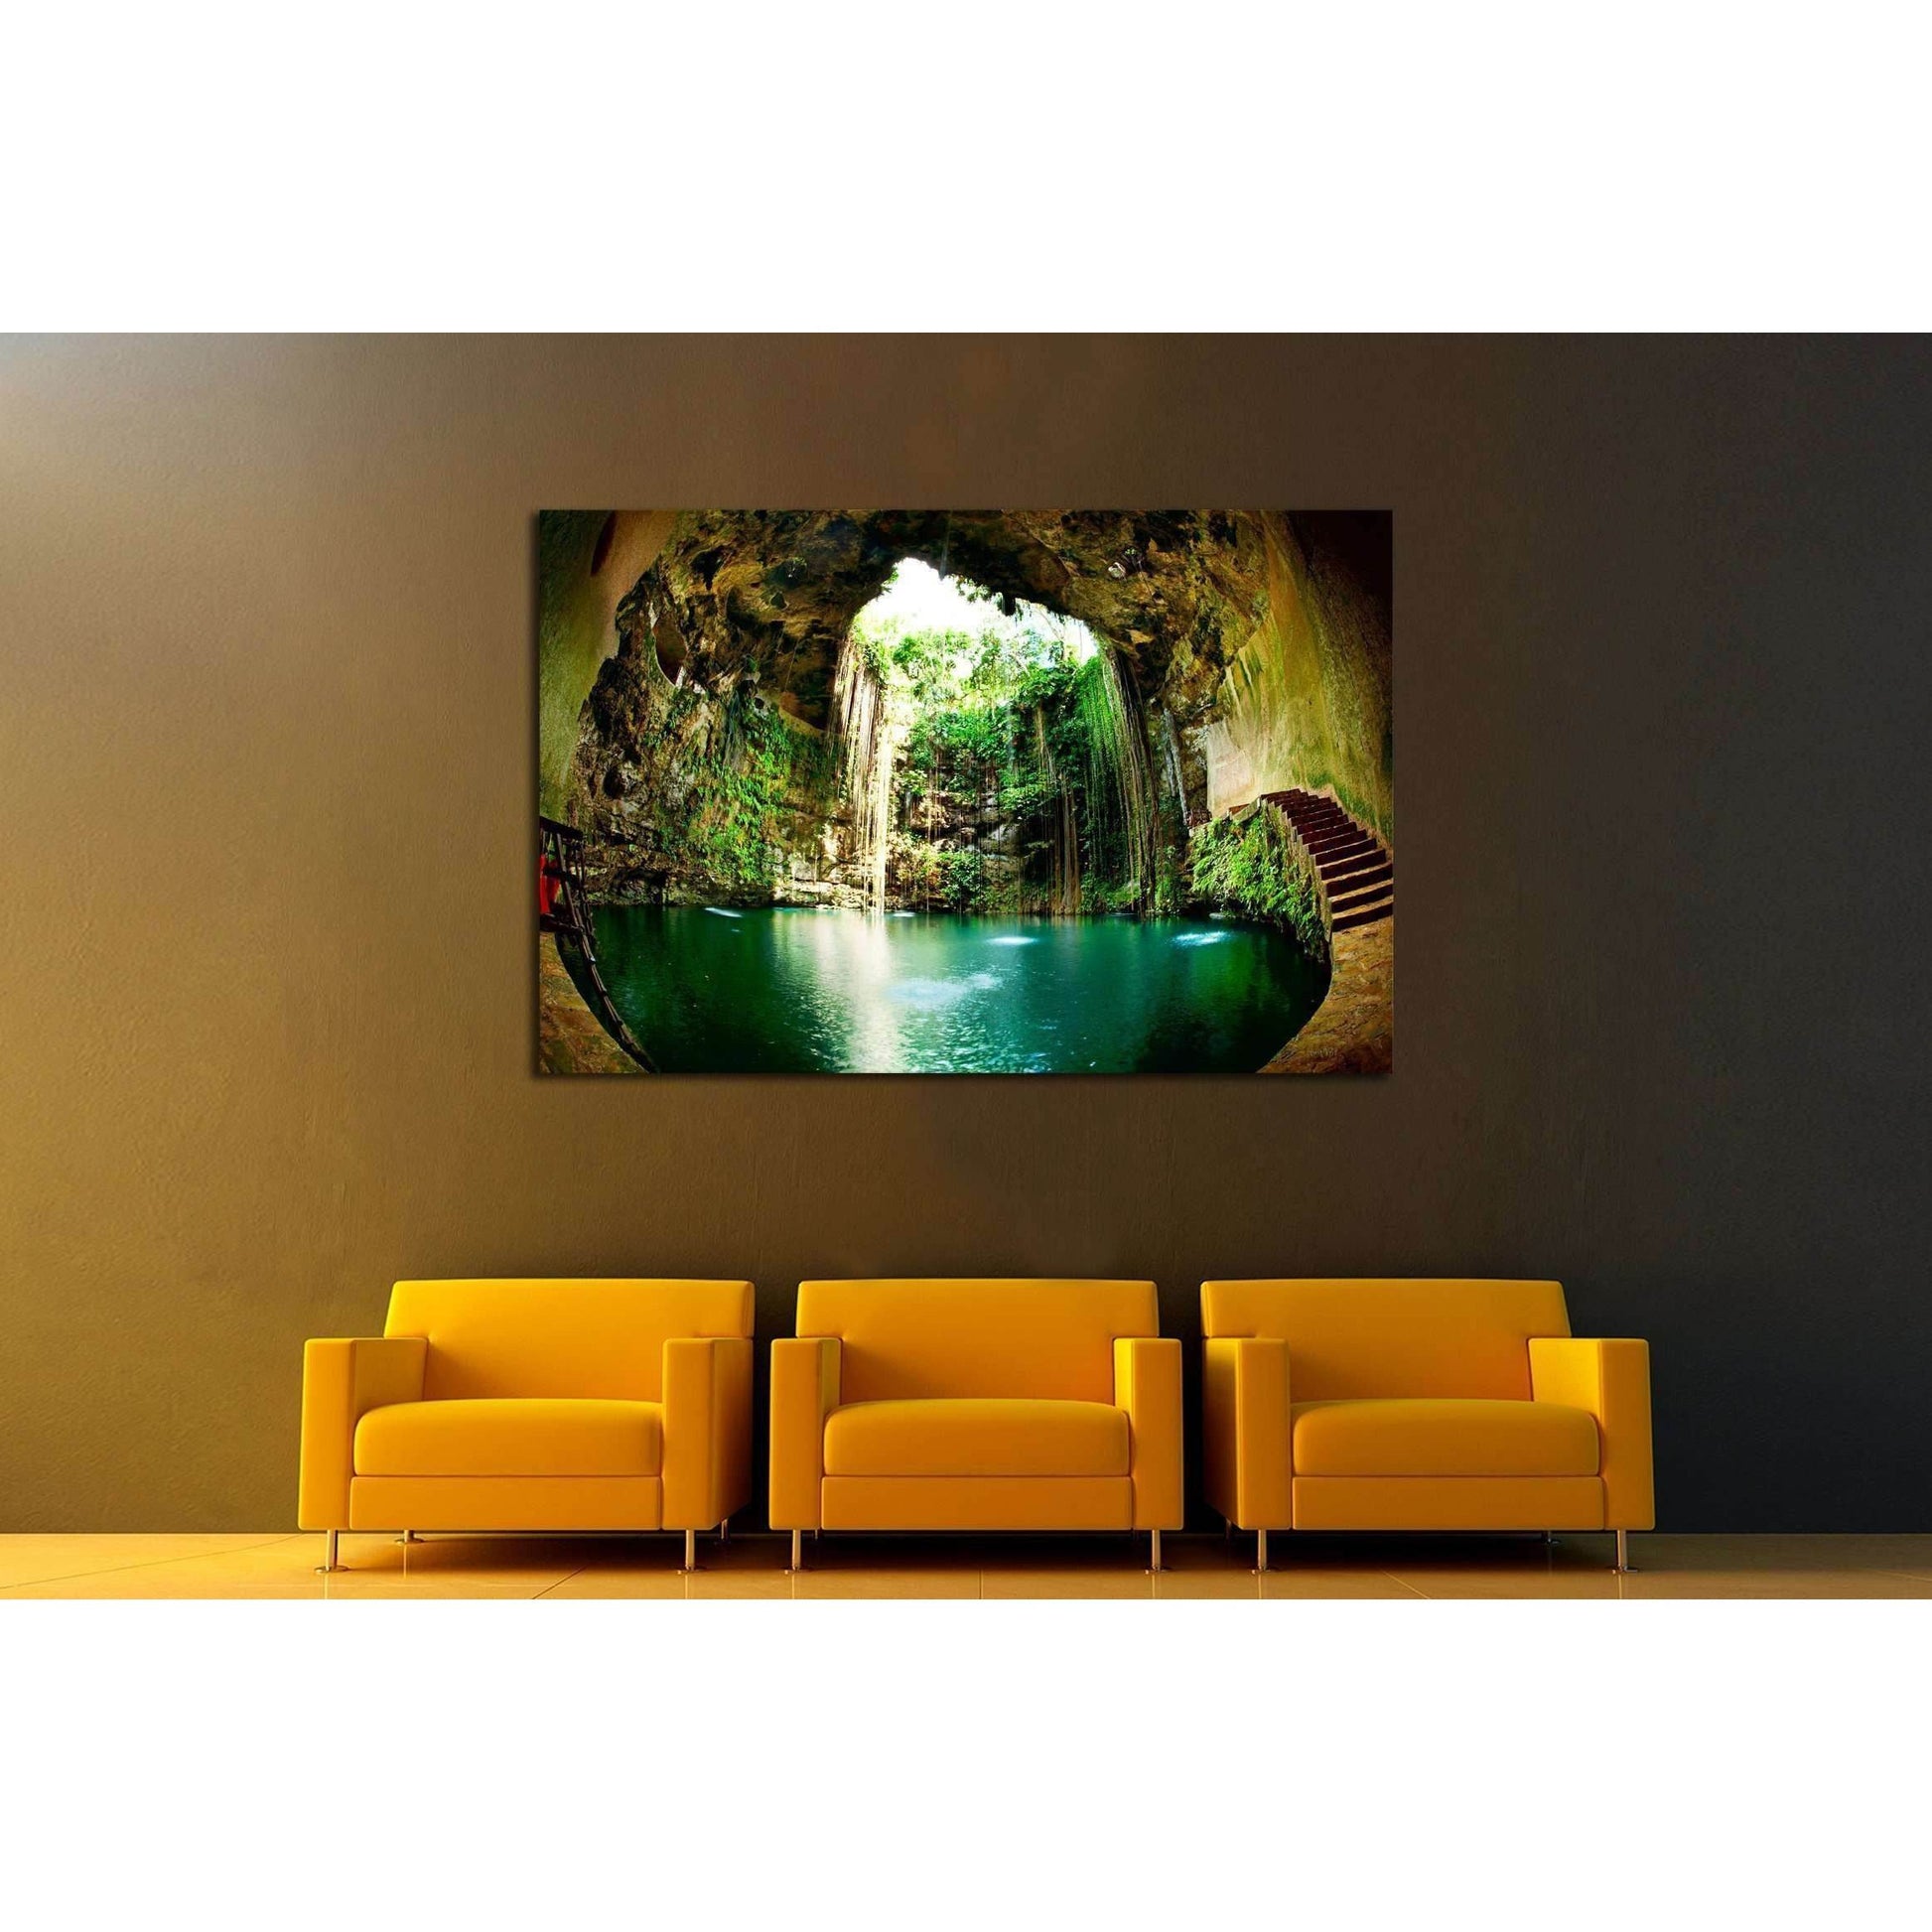 Ik-Kil Cenote, Chichen Itza, Mexico №2511 Ready to Hang Canvas PrintThis canvas print captures a serene natural cave pool, with sunlight filtering through lush greenery and a waterfall cascading into the tranquil water. The vivid green tones contrast with